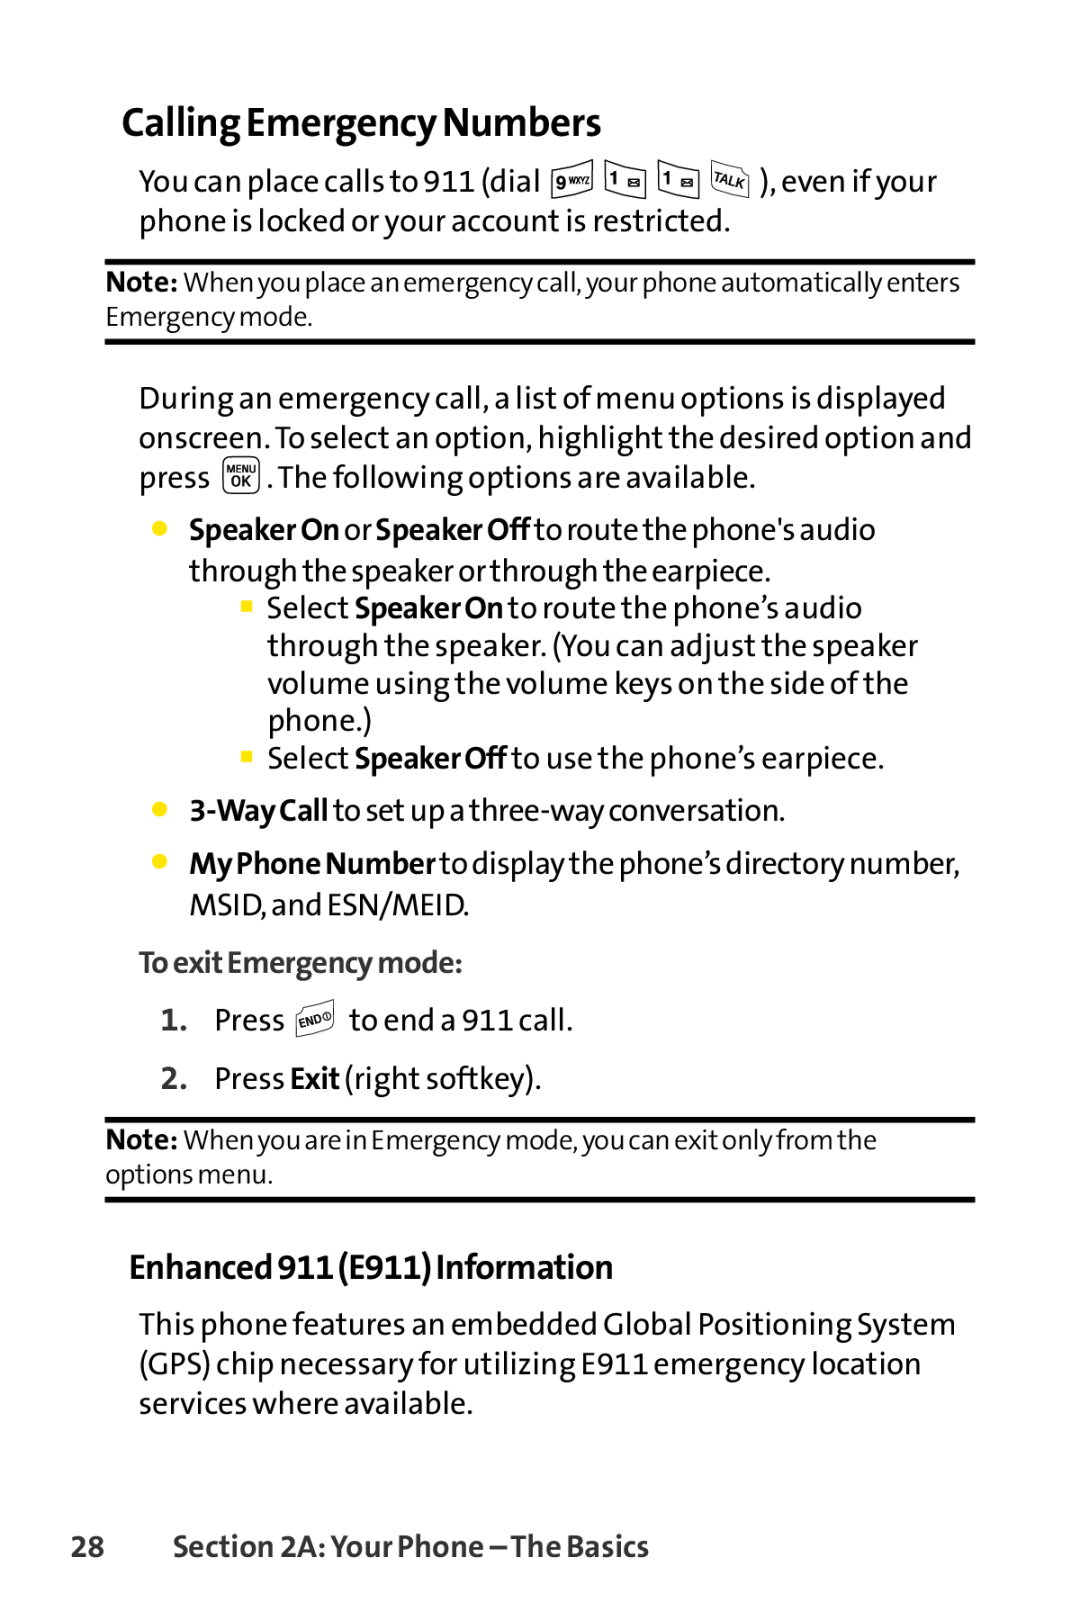 Sprint Nextel LX160 Calling Emergency Numbers, Enhanced911E911Information, ToexitEmergencymode, A Your Phone - The Basics 